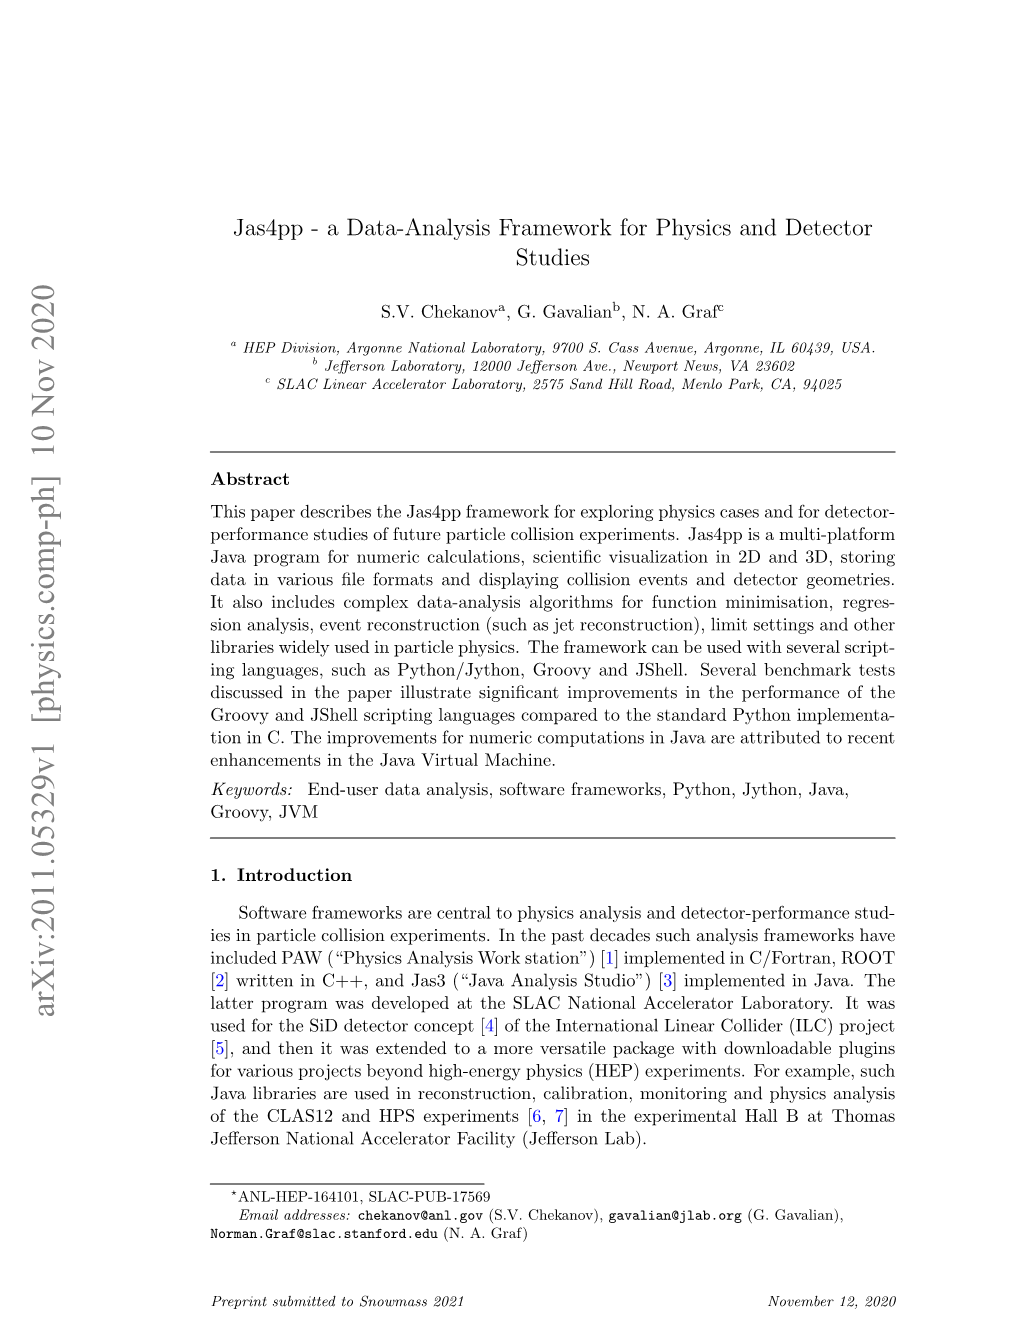 A Data-Analysis Framework for Physics and Detector Studies